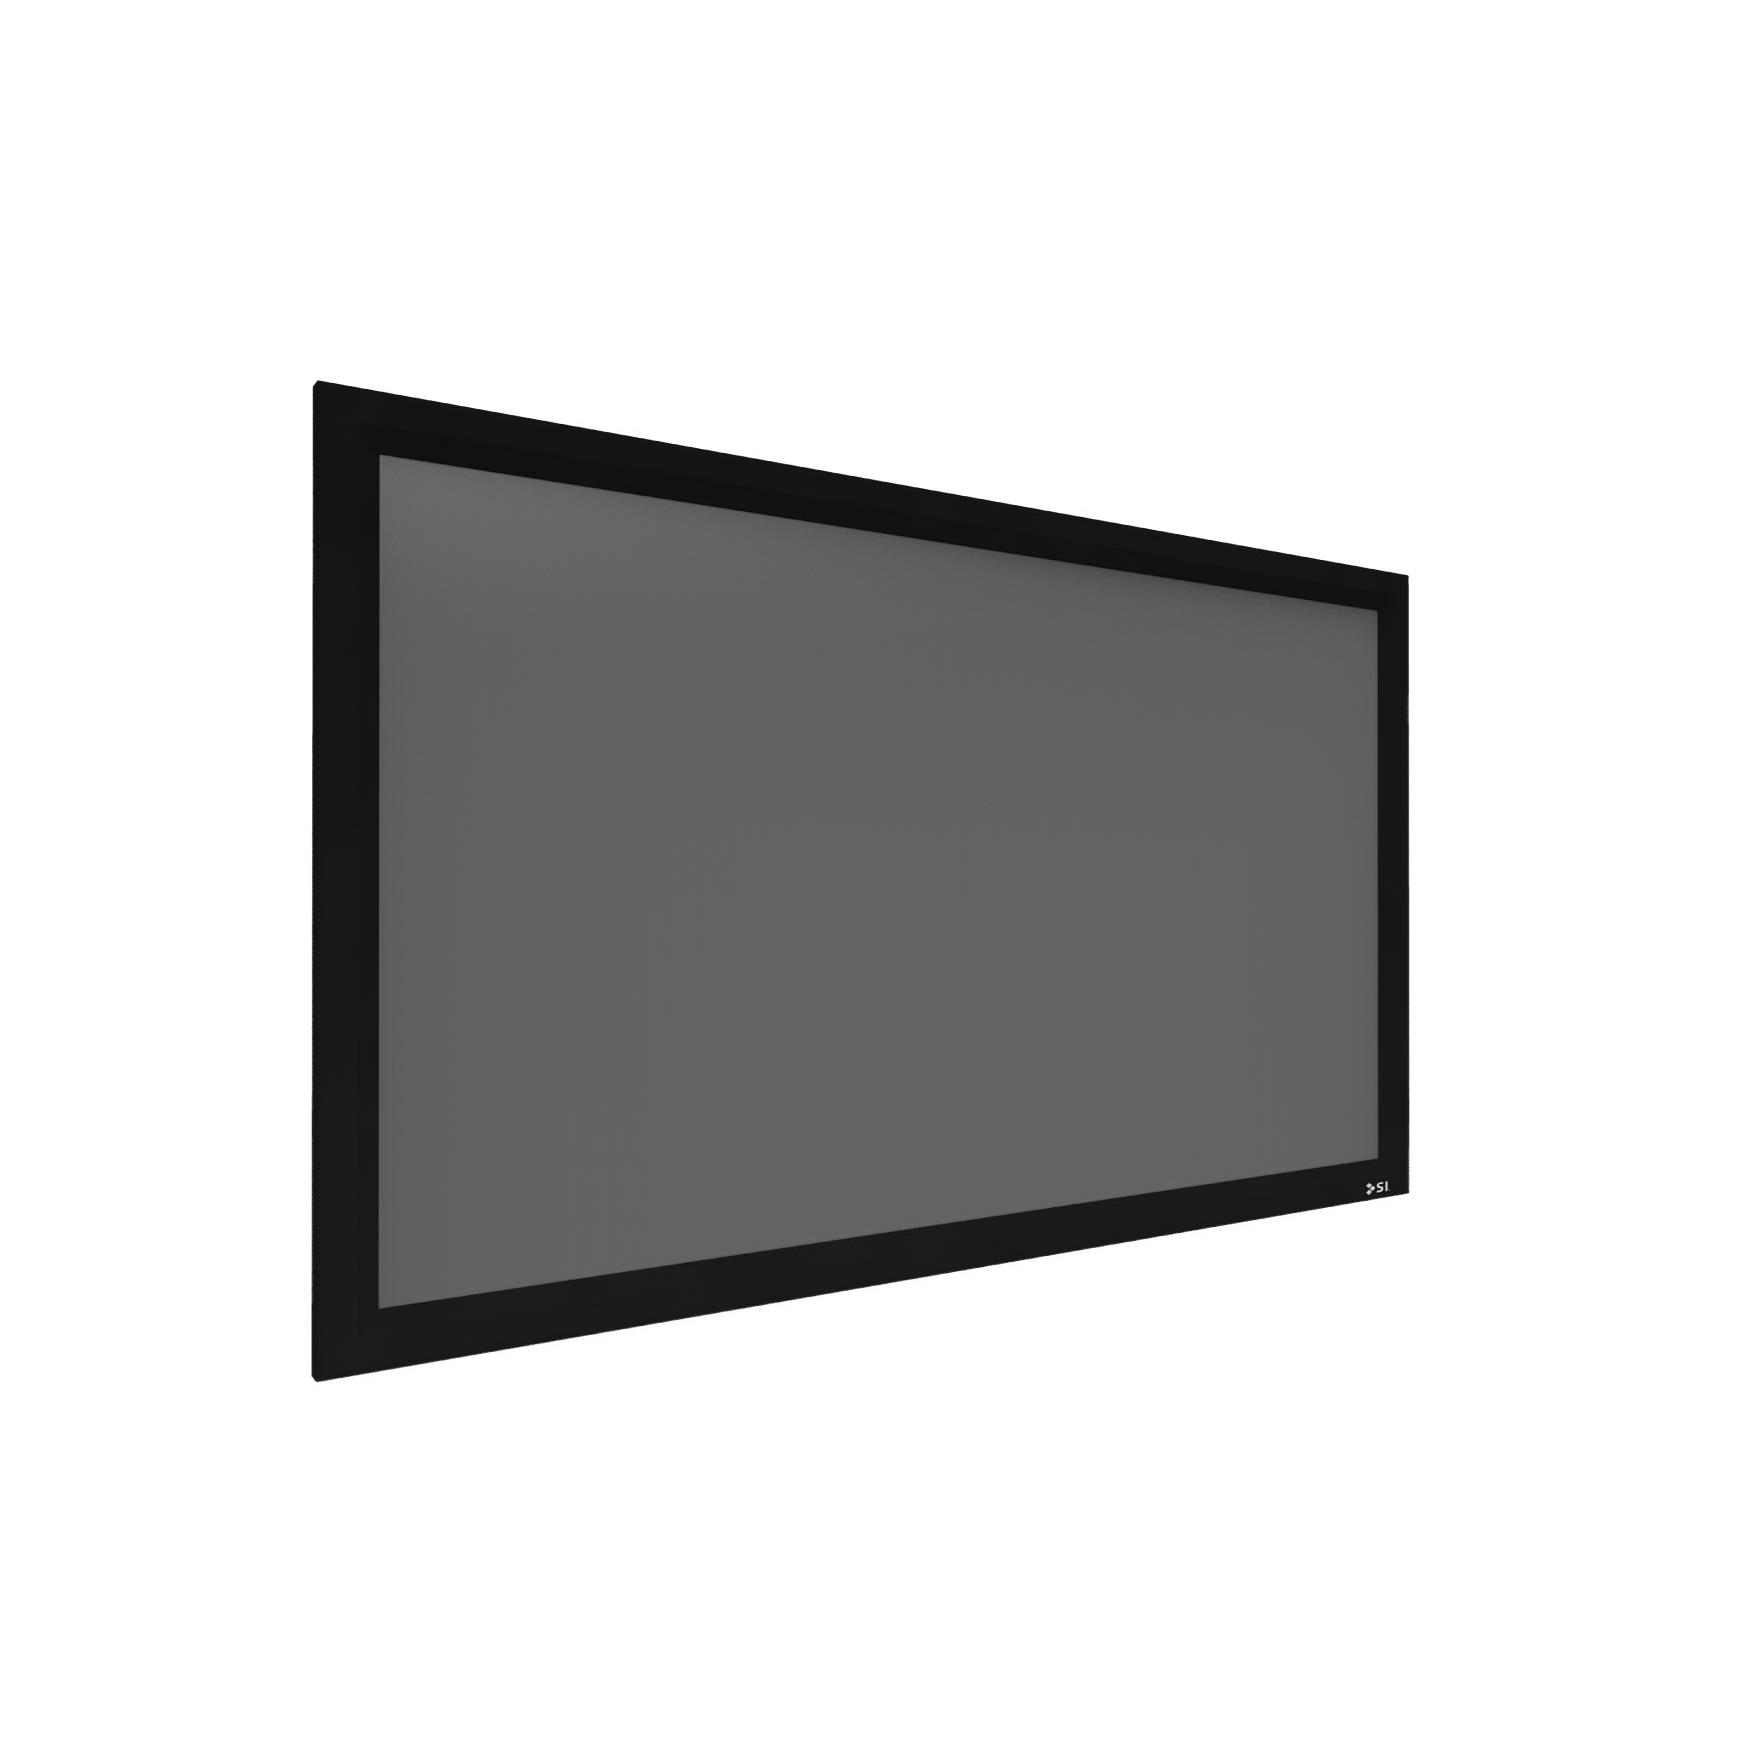 Screen Innovations 5 Series Fixed - 229